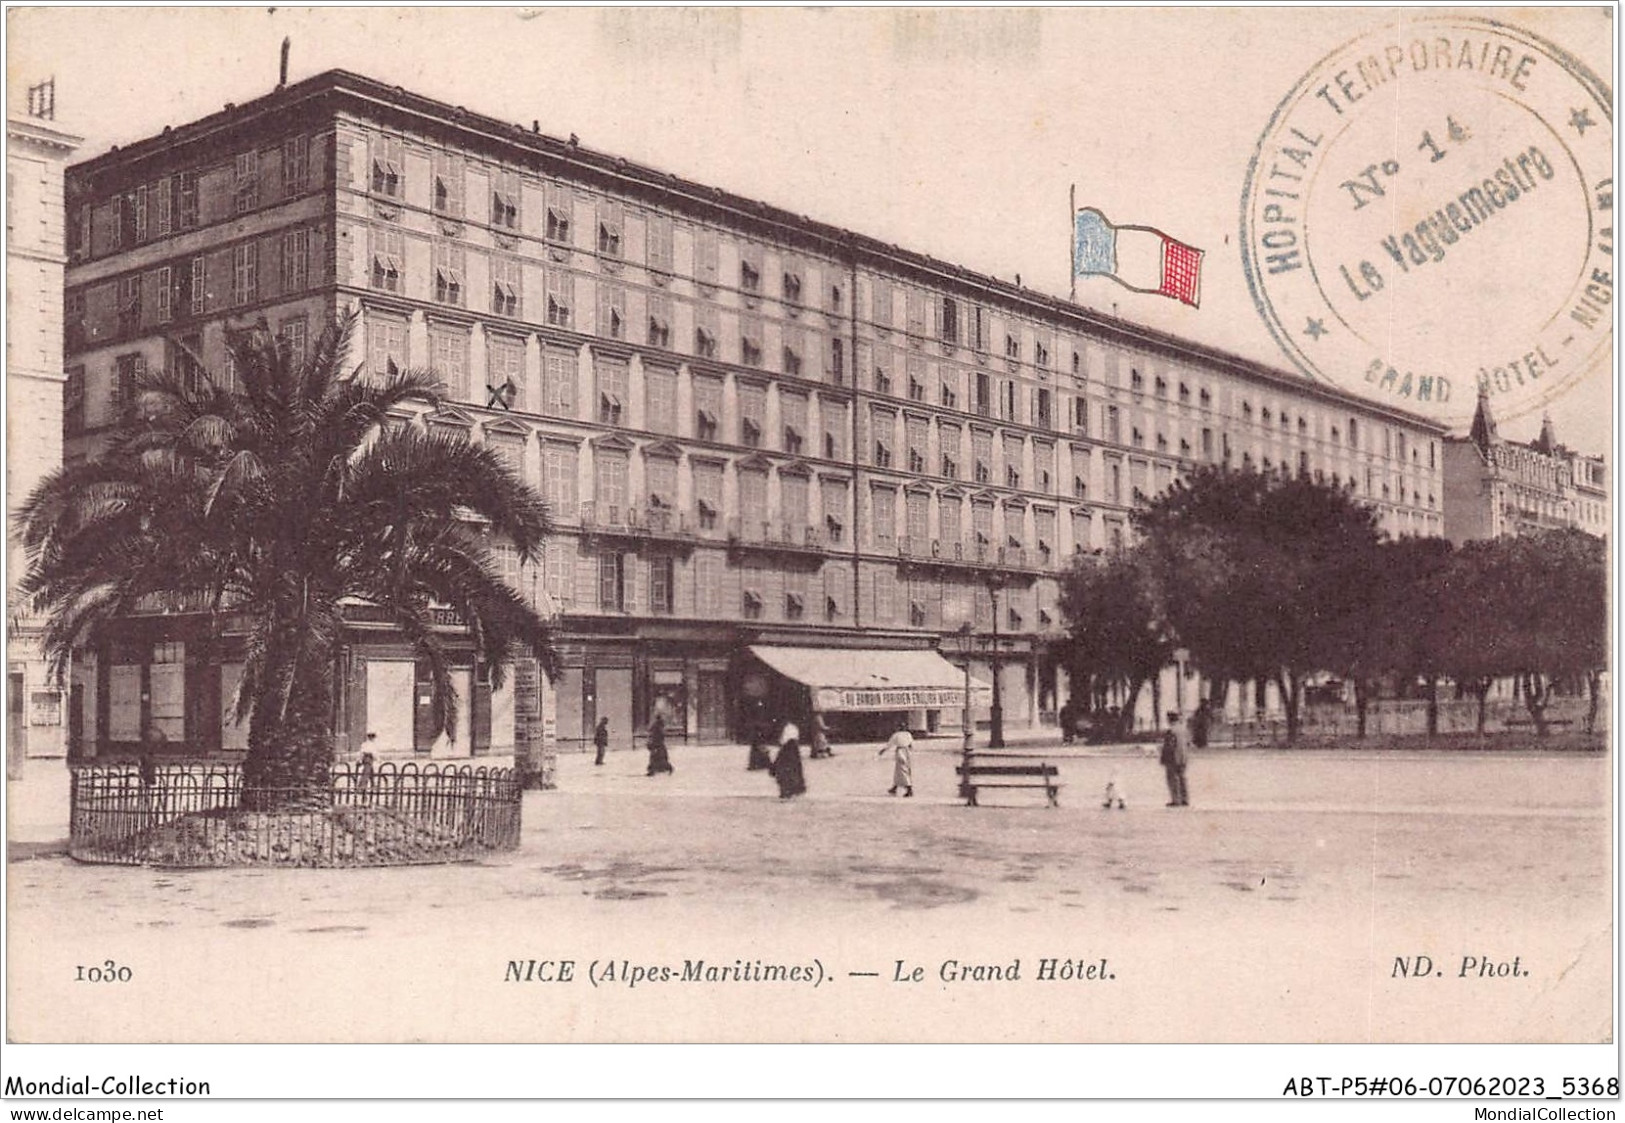 ABTP5-06-0372 - NICE - Le Grand Hotel - Monuments